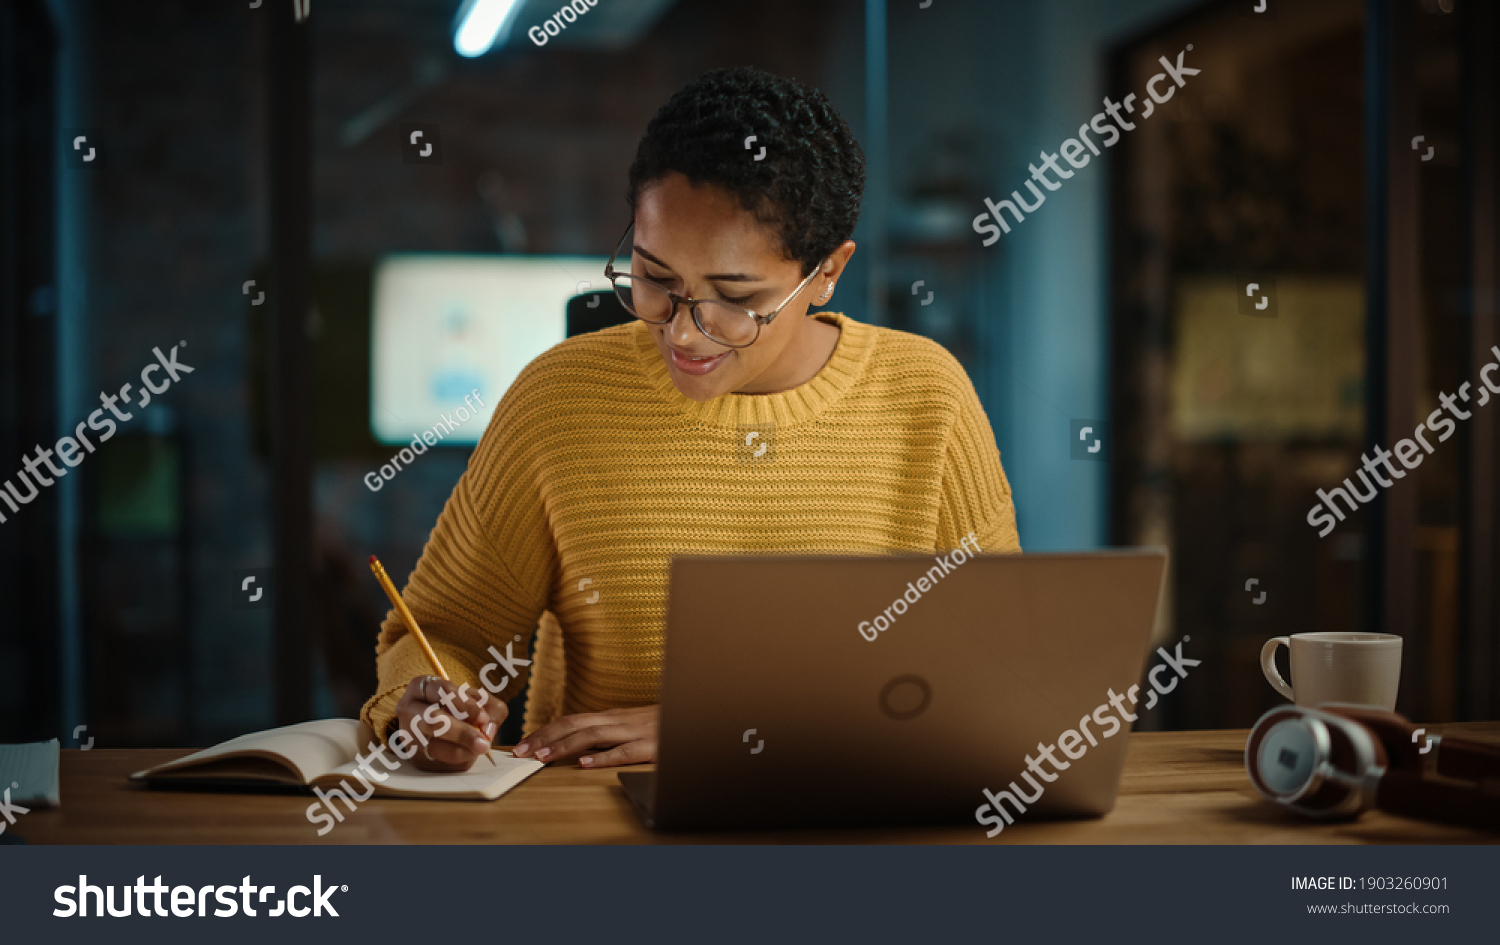 Young Hispanic Marketing Specialist Working on Laptop Computer in Busy Creative Office Environment. Beautiful Diverse Multiethnic Female Project Manager is Writing Down Notes in Paper Notebook. #1903260901